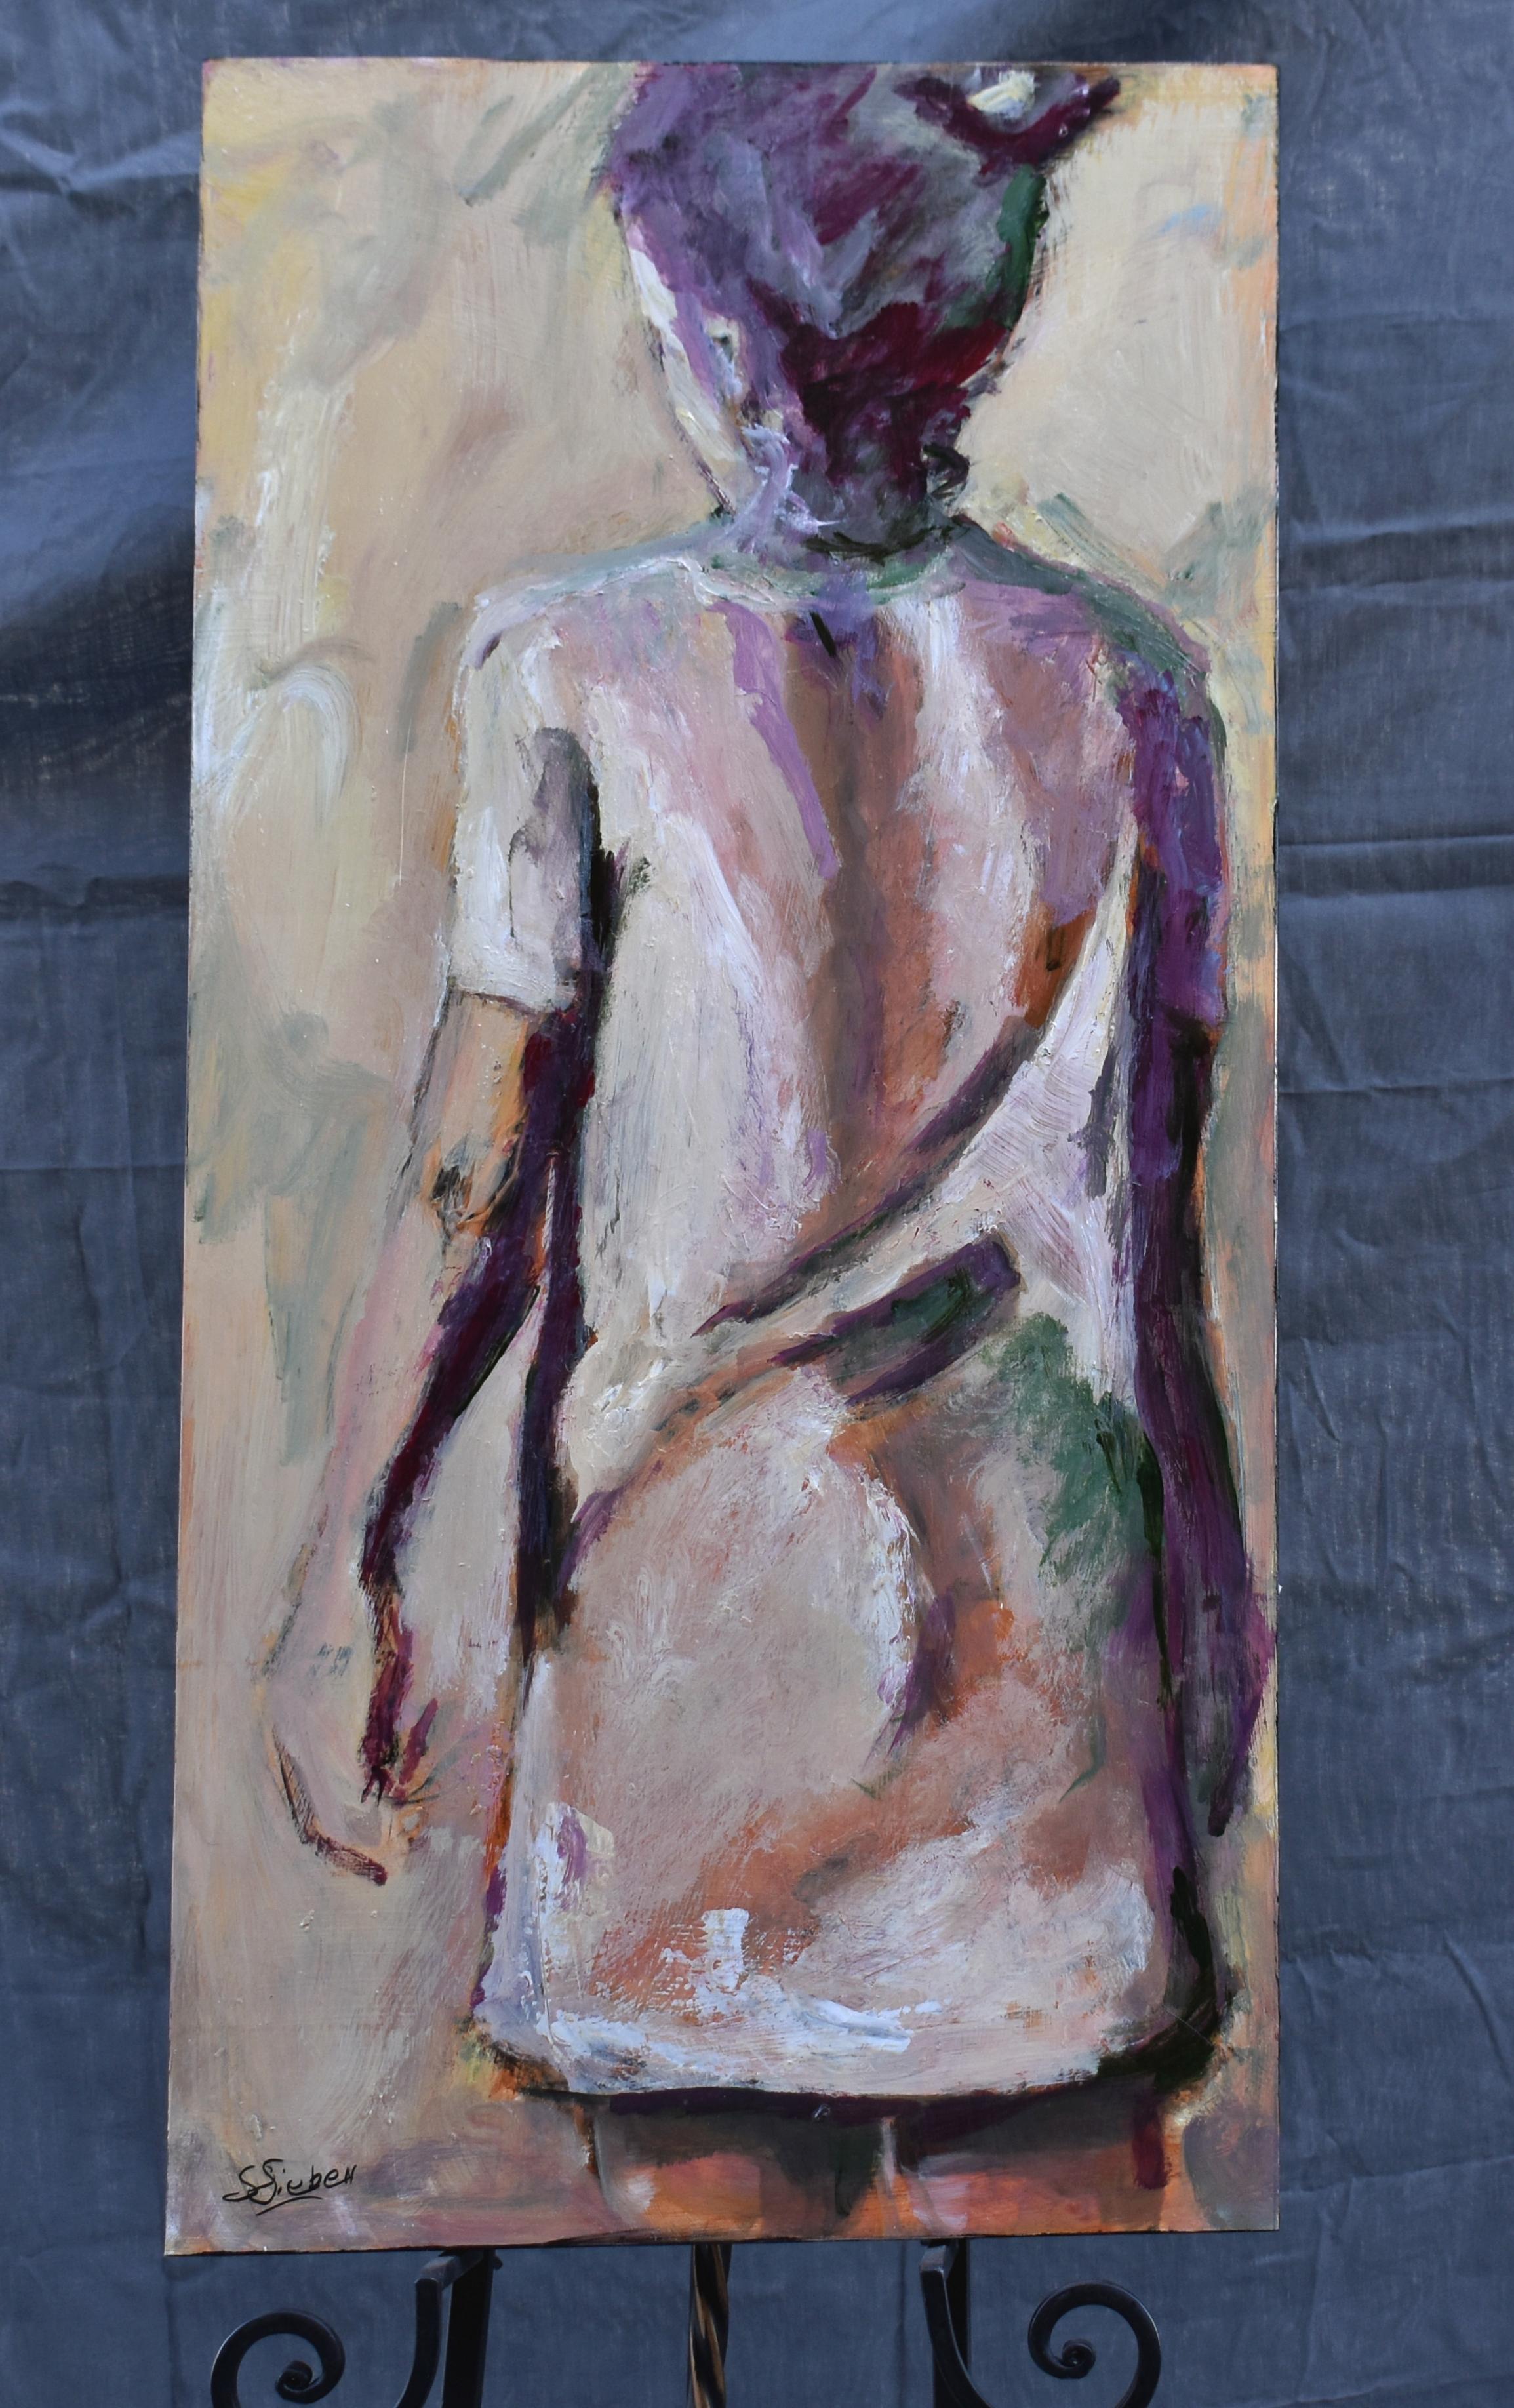 <p>Artist Comments<br>A wet t-shirt makes this a nearly nude figurative painting.  </p><p>About the Artist<br>Sharon Sieben prefers working in a loose, fluid technique and finds inspiration in the most unexpected things. Her parents bought her a set